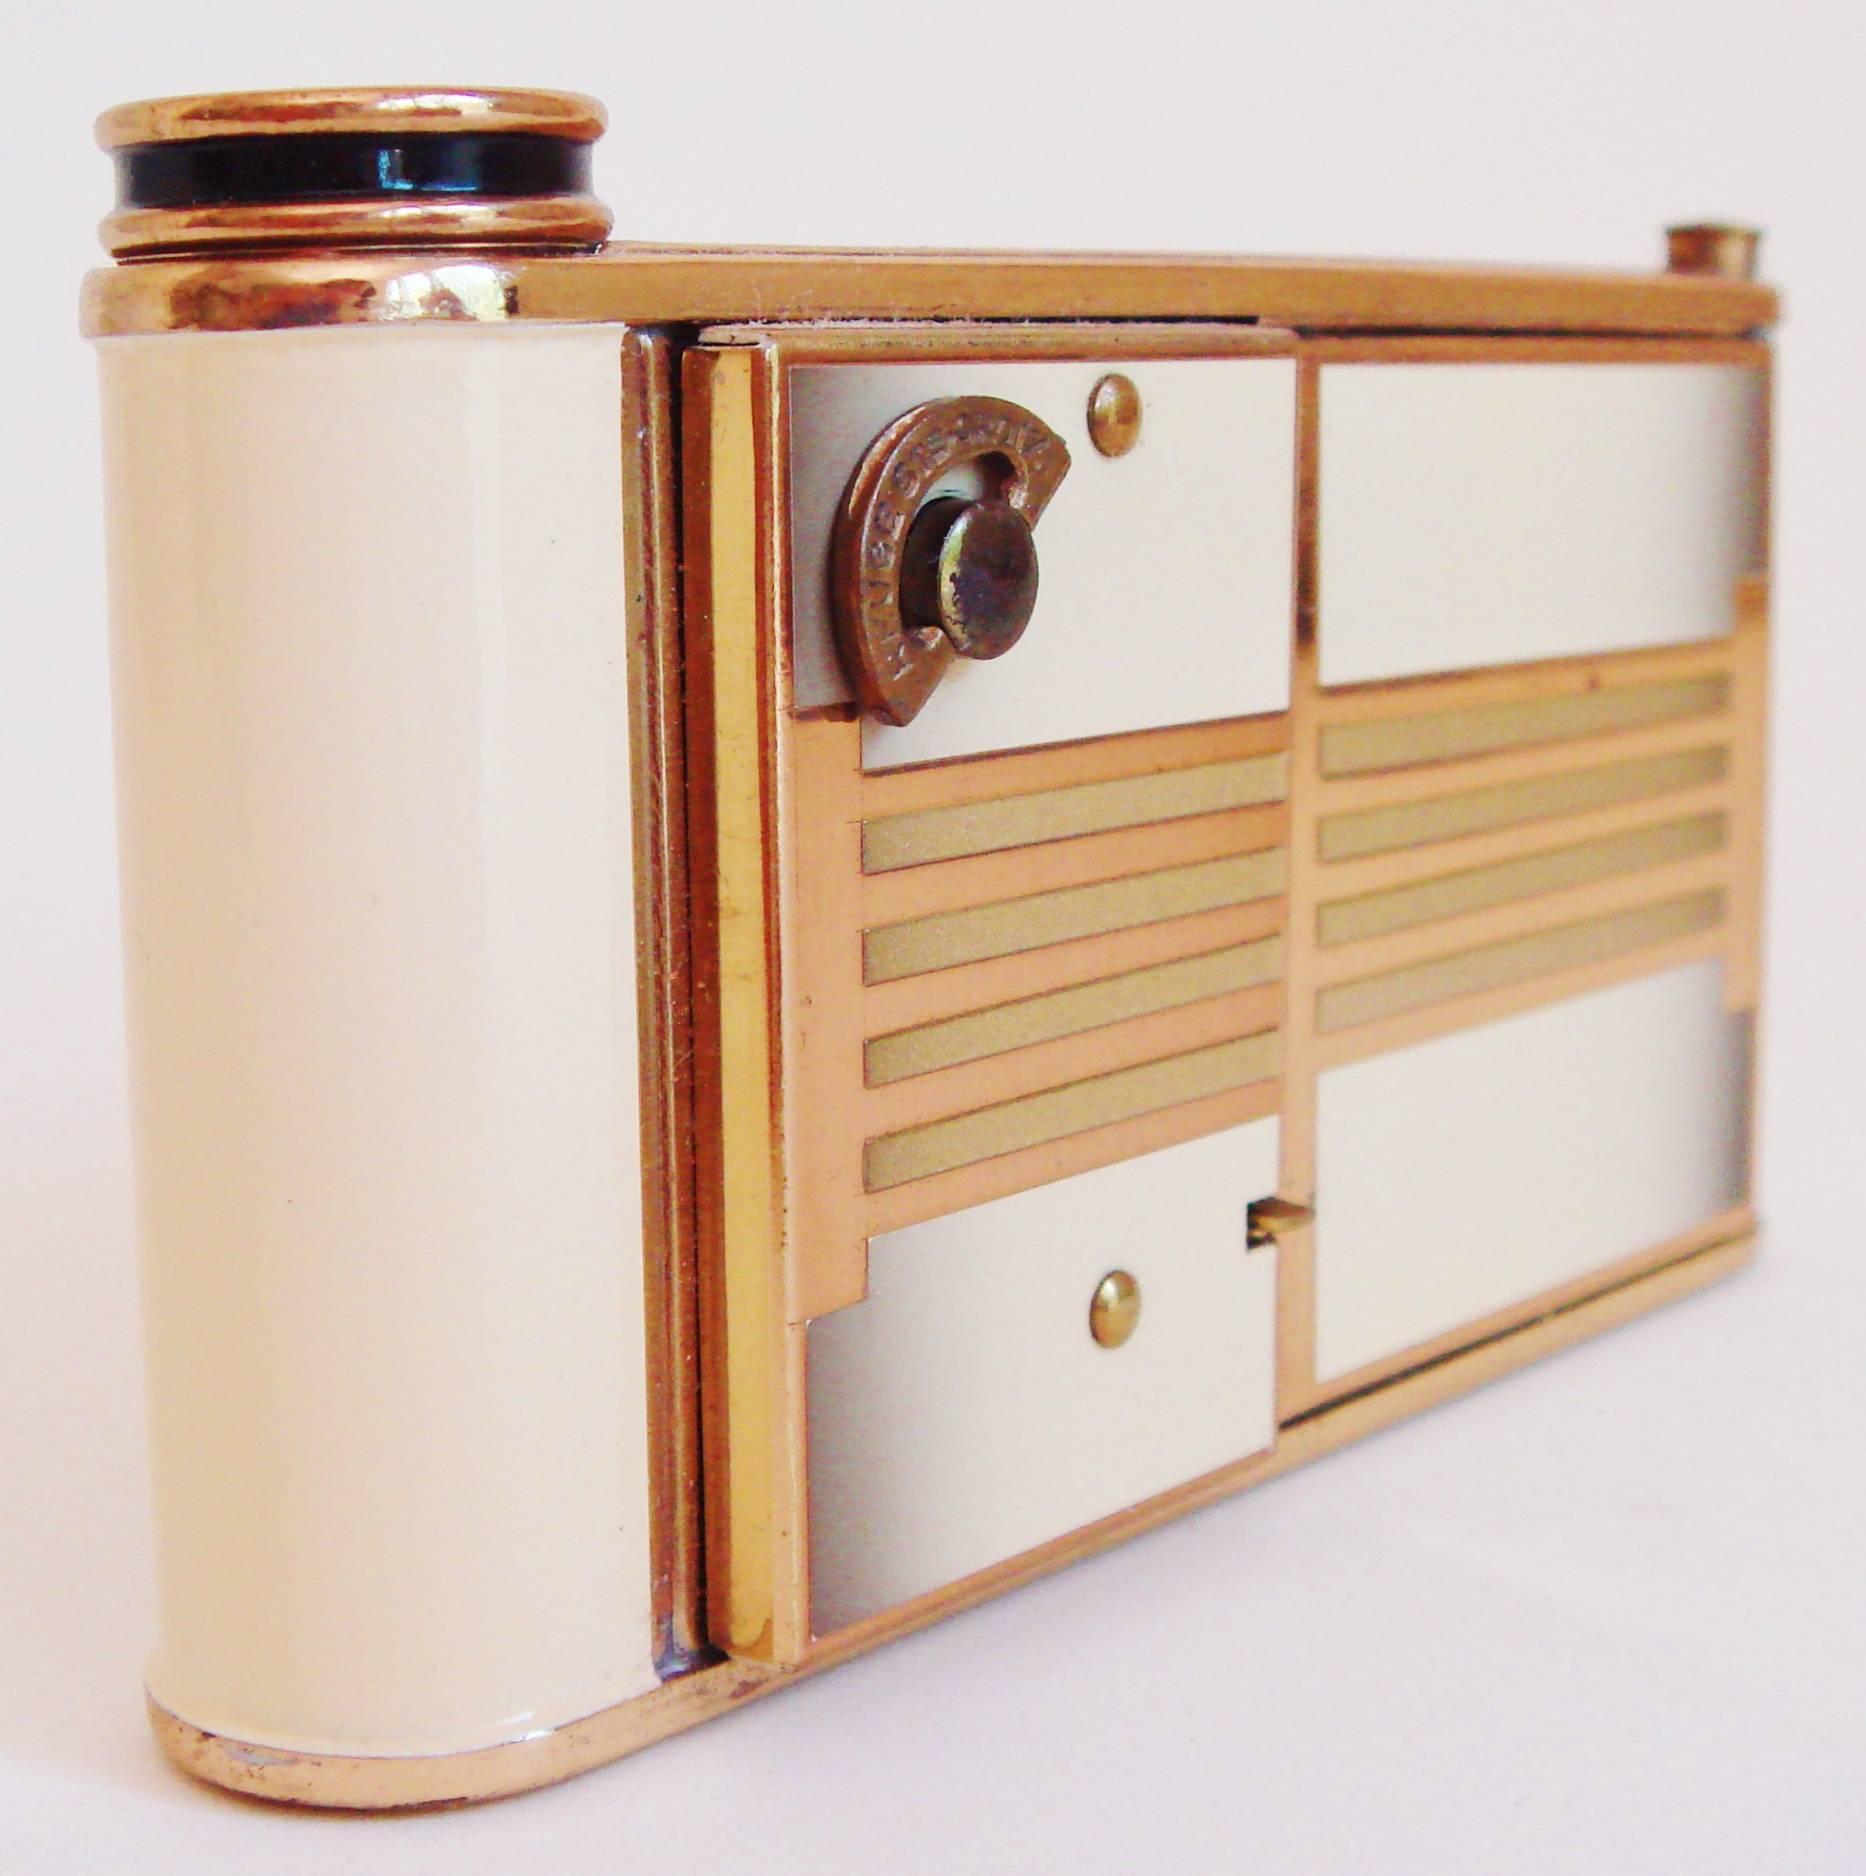 This ingenious style of German Art Deco musical combination compact and cigarette case was known as a Camera or Kamra Compact. Versions of these were produced with sewing kits instead of cigarettes, integral watches and even with an actual camera.